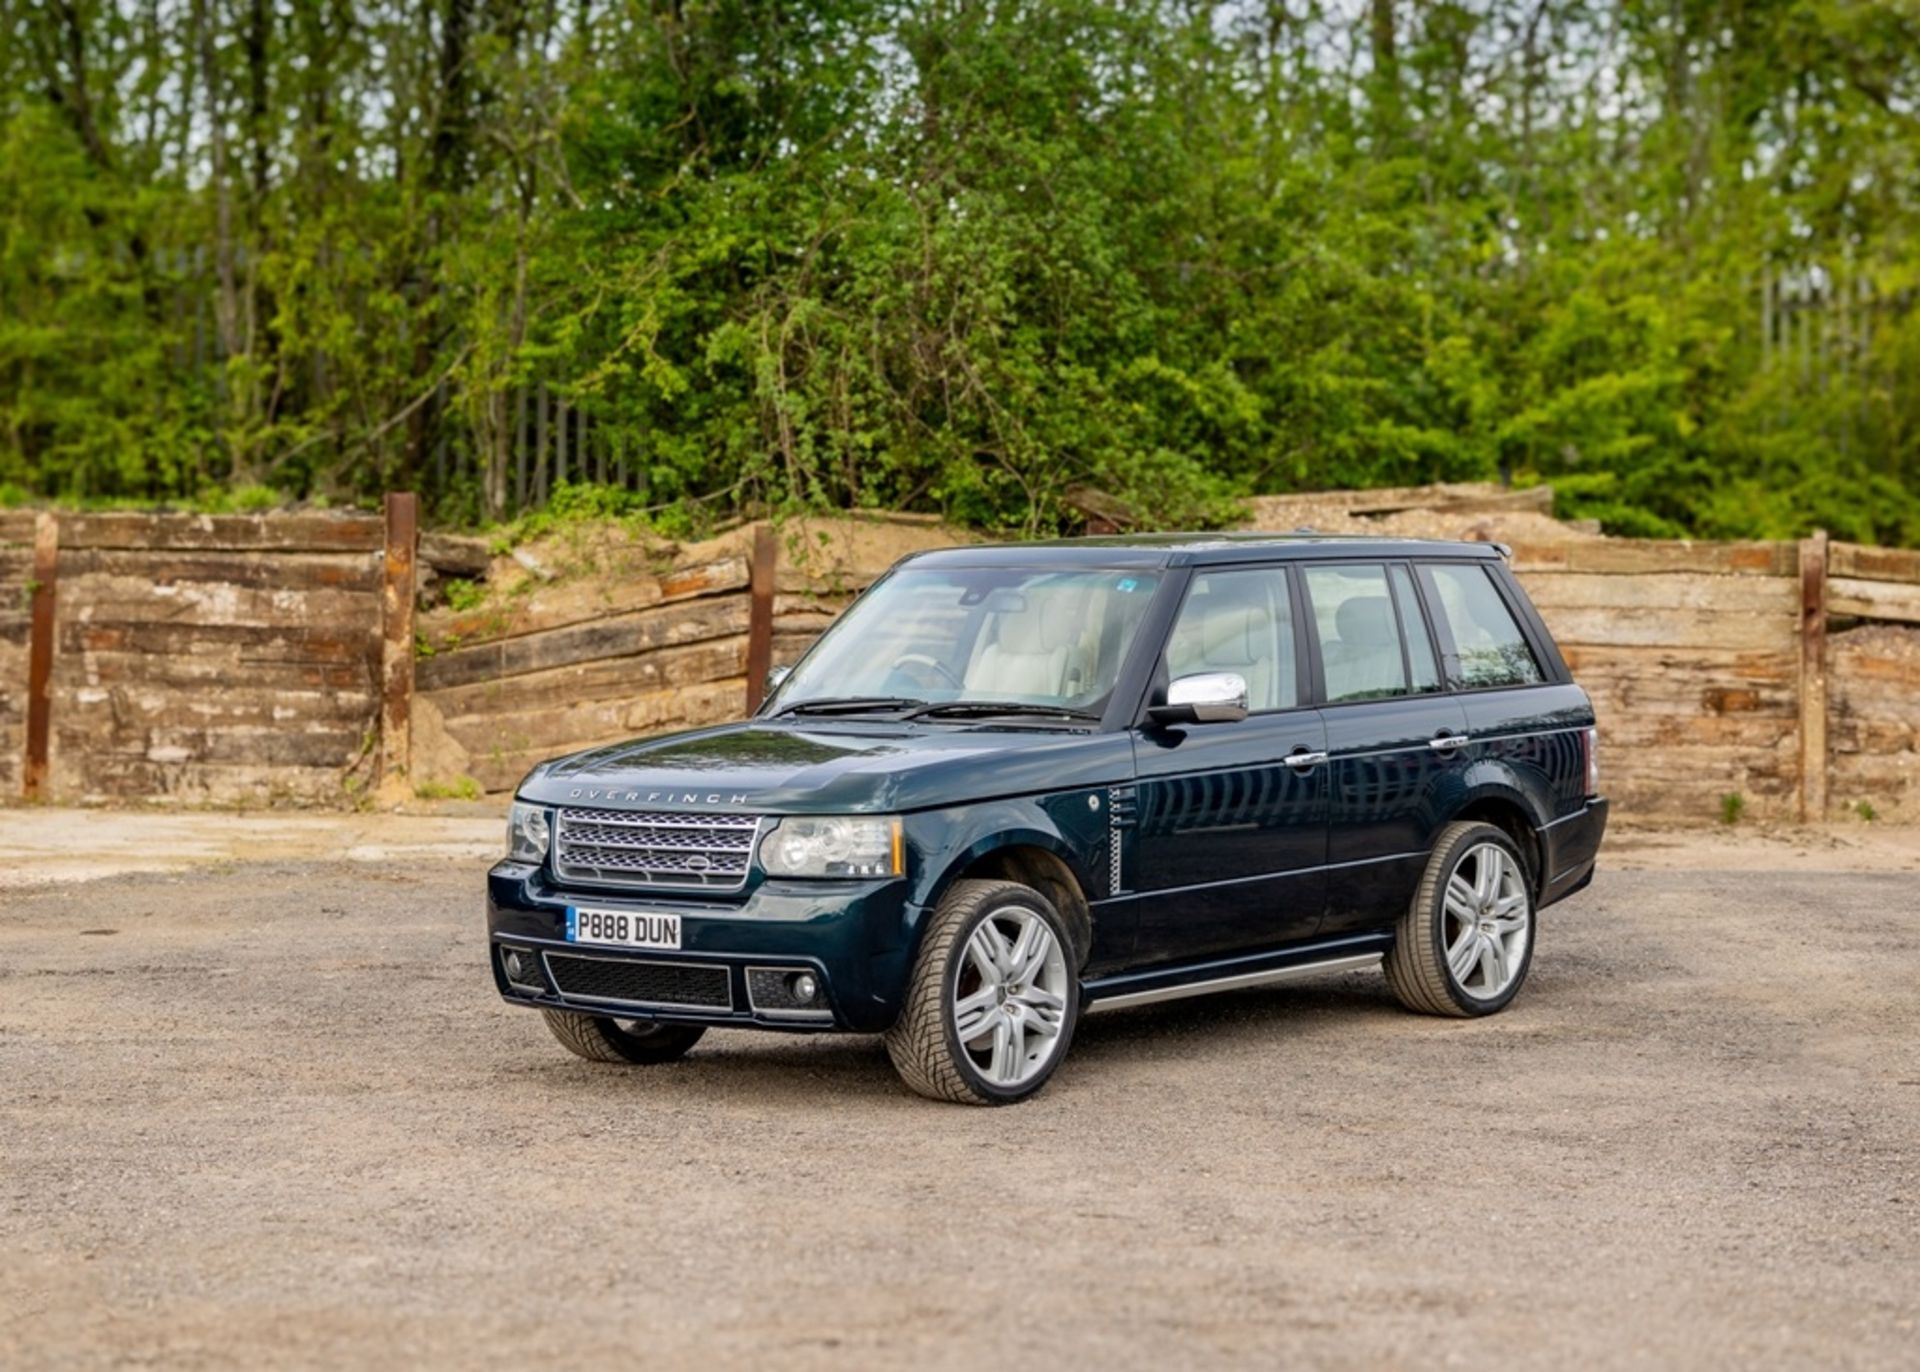 2009 Range Rover L322 Holland & Holland 5.0 Supercharged - Image 6 of 40